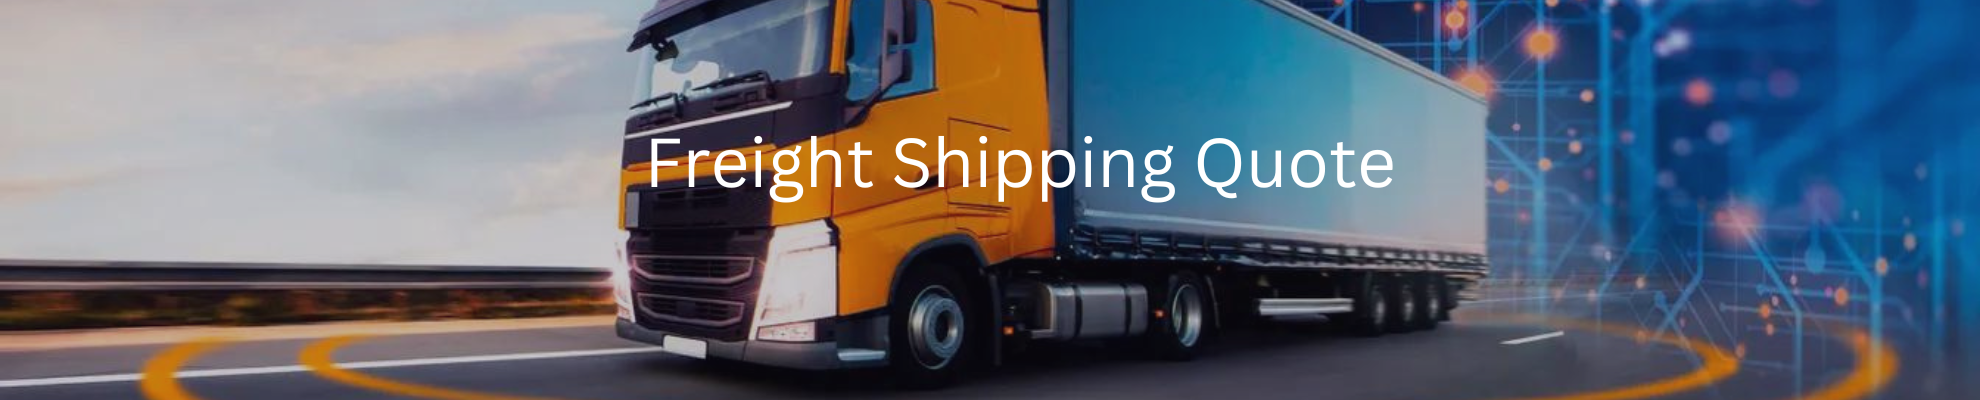 Freight Shipping Quote | Riseonic Shipping Lines